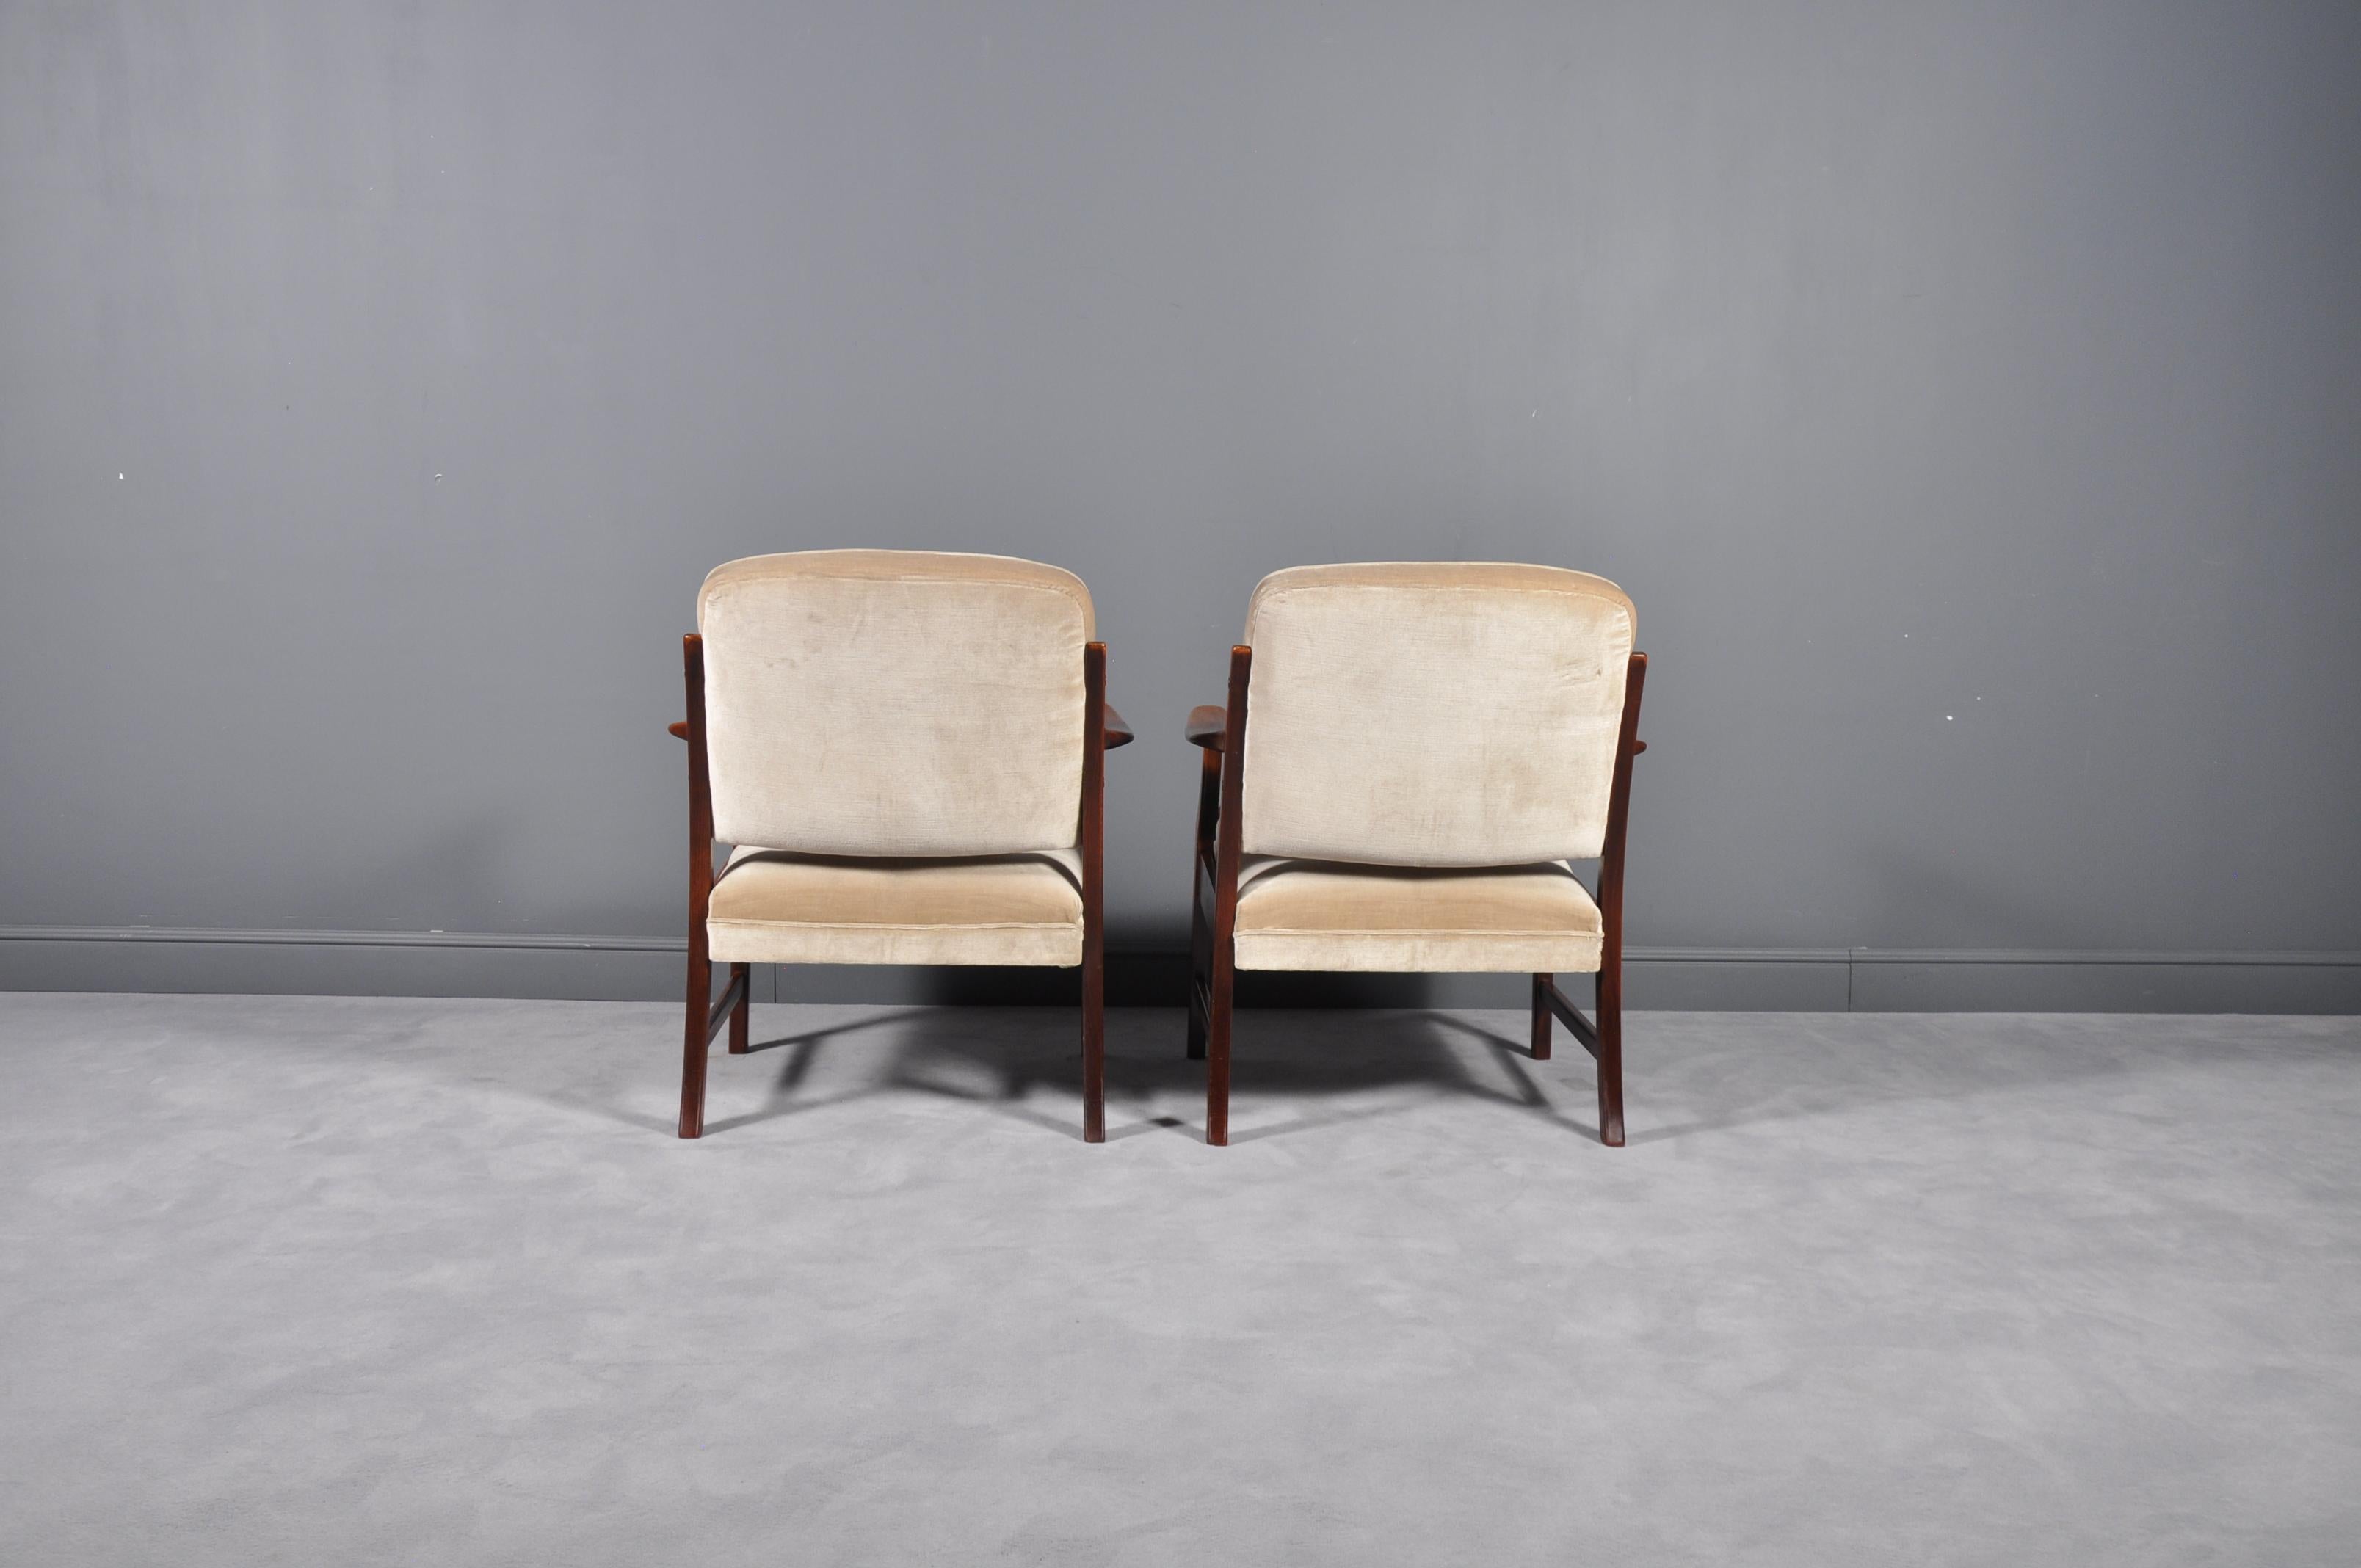 Pair of Two Danish Midcentury Modern Arm Dining Chairs, 1960s In Good Condition For Sale In Bucharest, RO